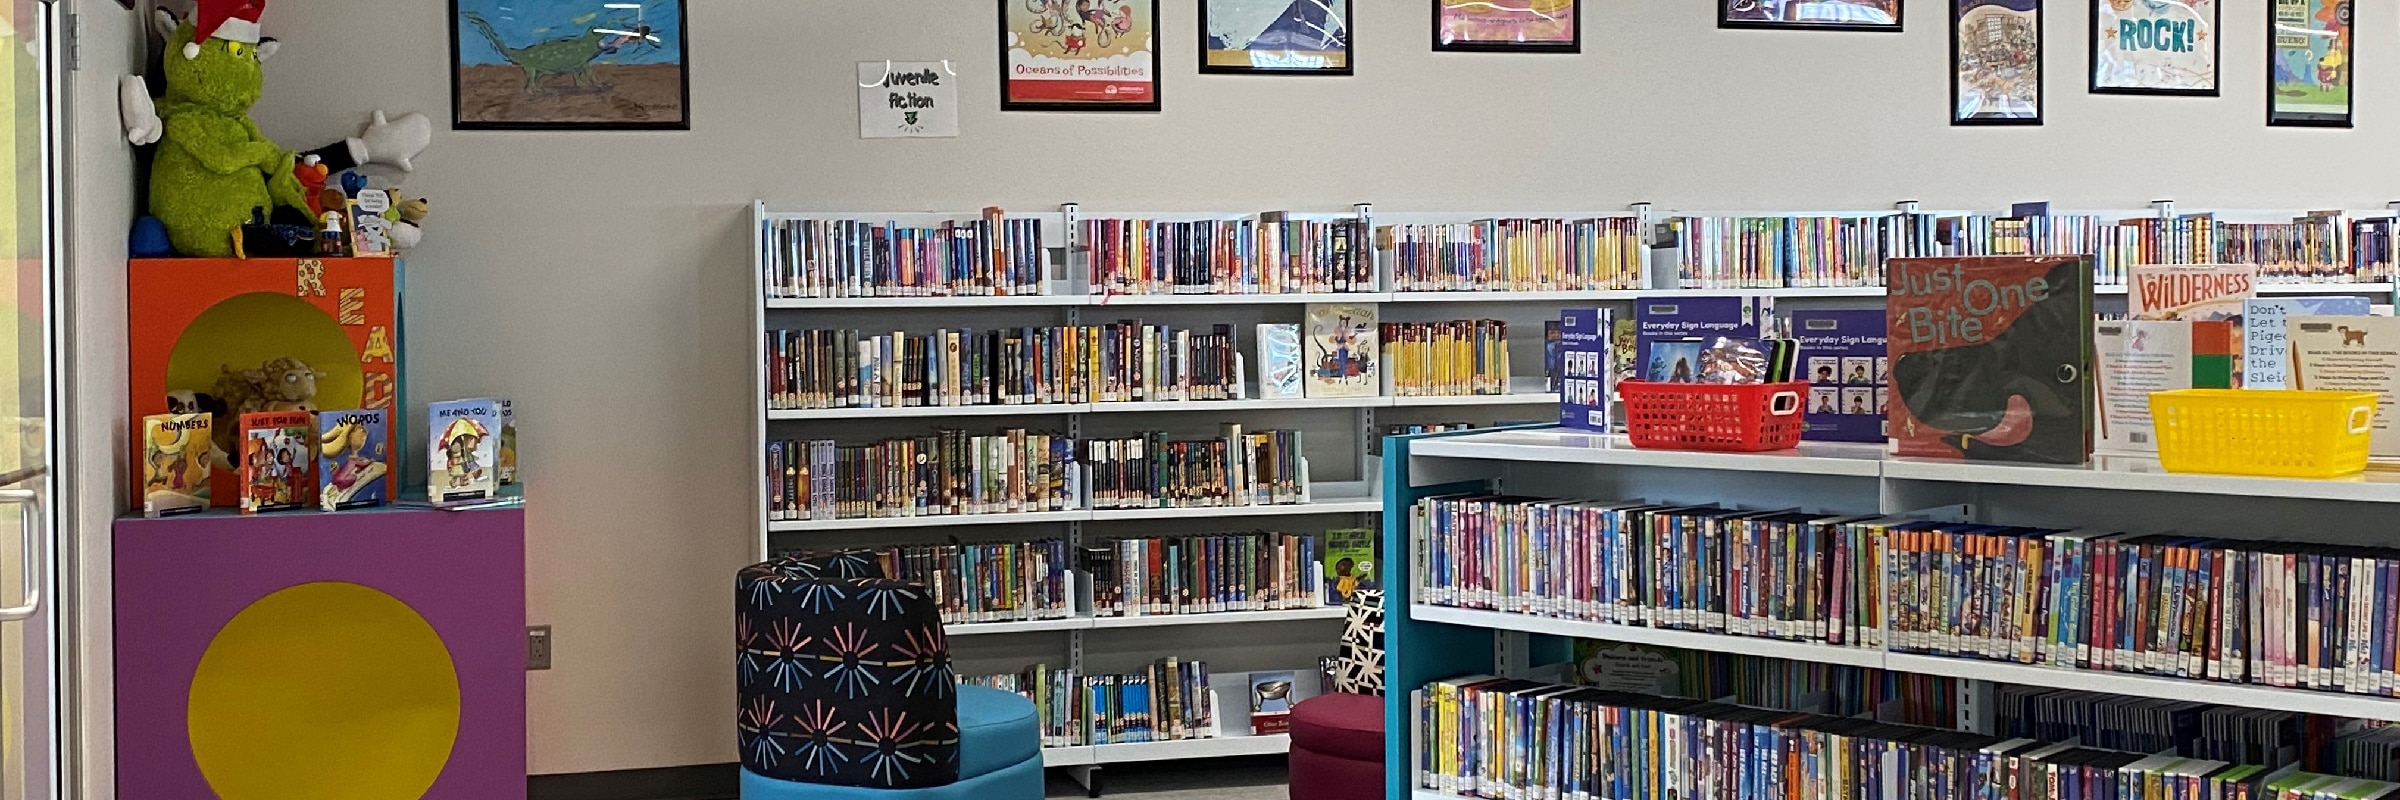 Children's book section in library